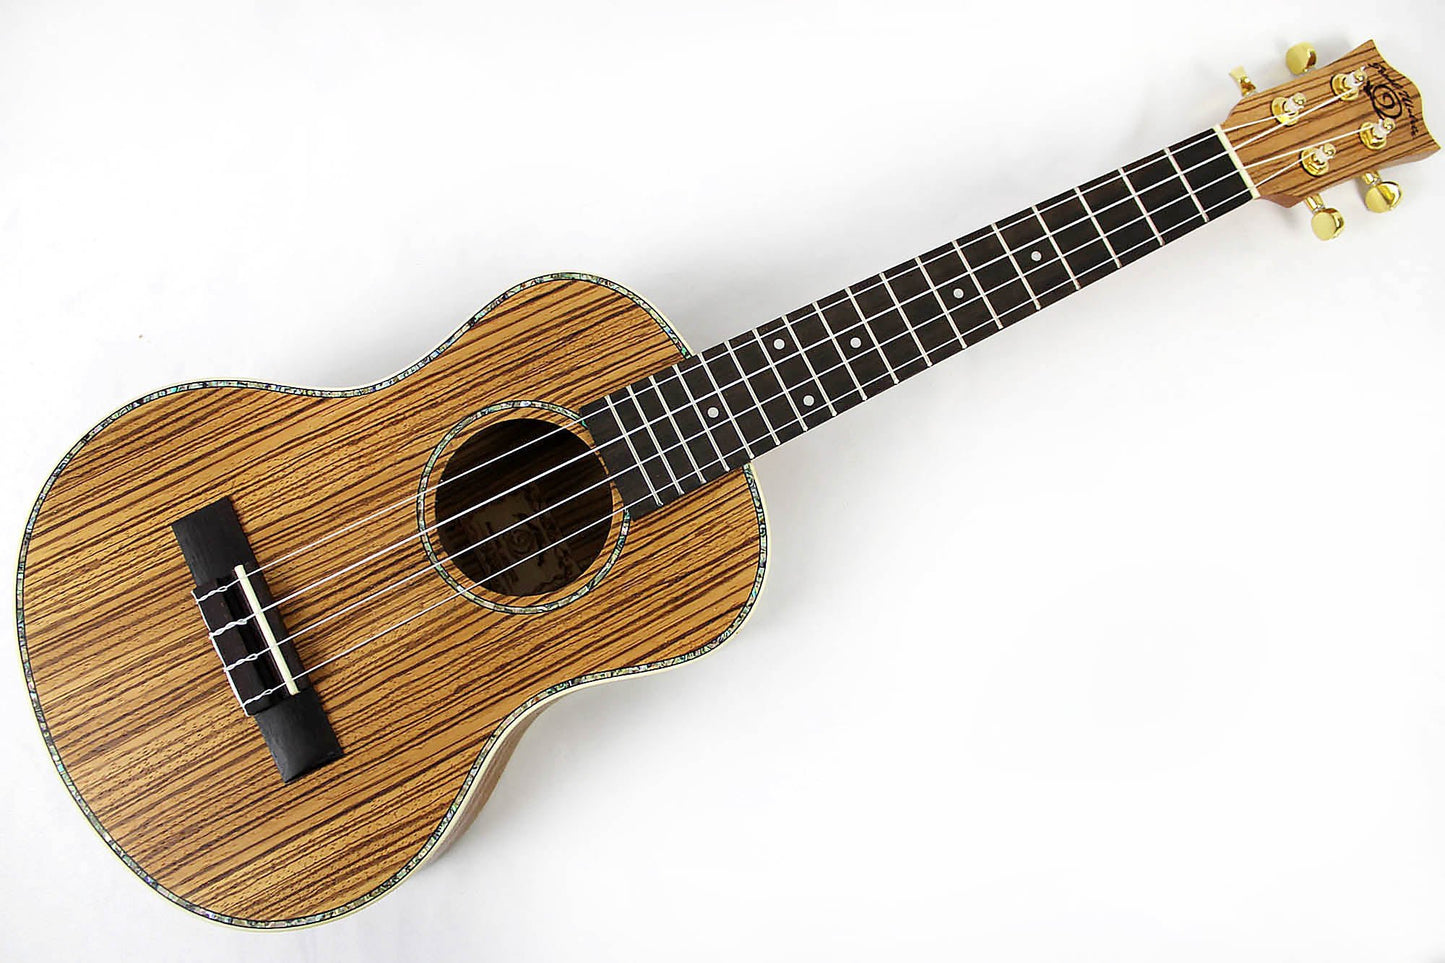 This is the front full view of the top and neck of a Snail SNAILZEBUKT Zebrawood Tenor Ukulele.